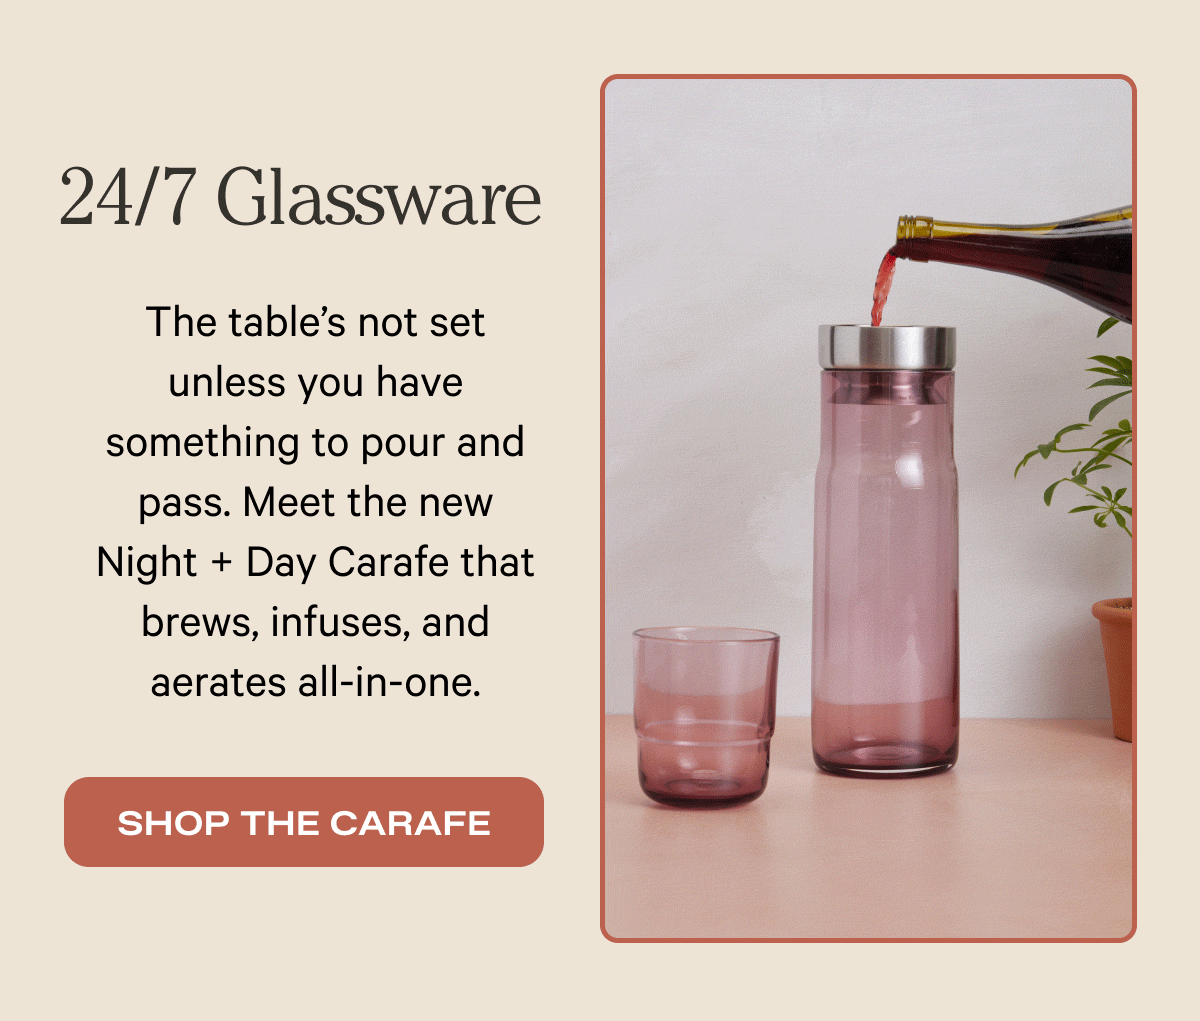 24/7 Glassware - The table’s not set unless you have something to pour and pass. Meet the new Night + Day Carafe that brews, infuses, and aerates all-in-one.. - Shop the Carafe